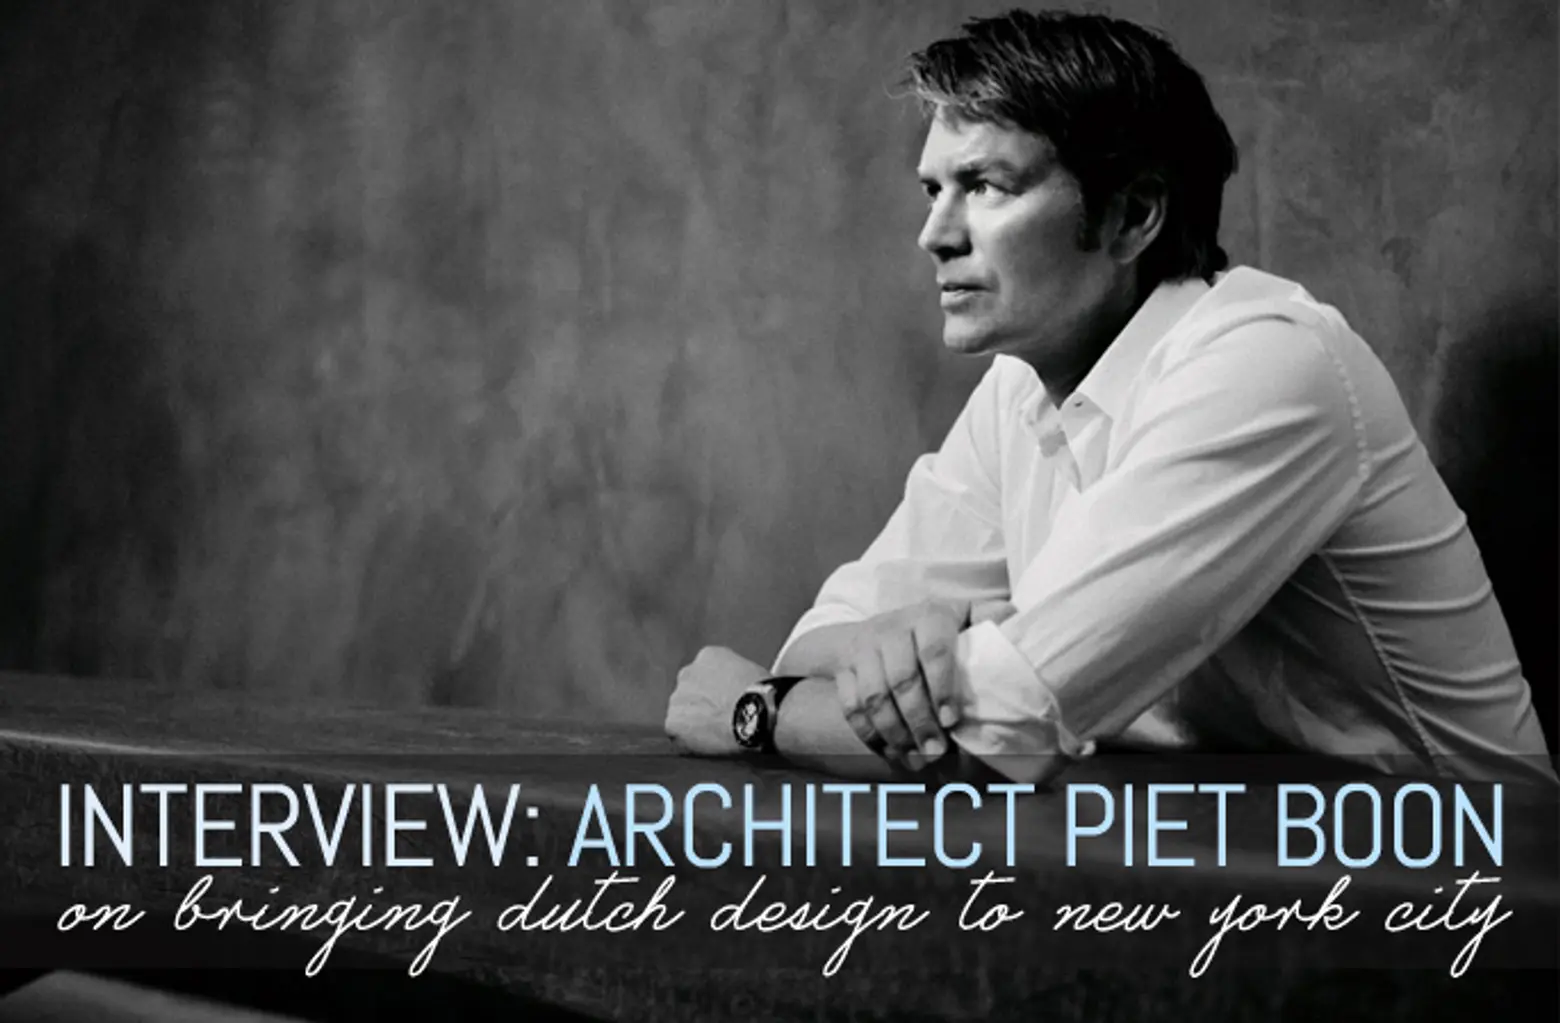 INTERVIEW: Renowned Architect Piet Boon on Bringing Dutch Design to NYC